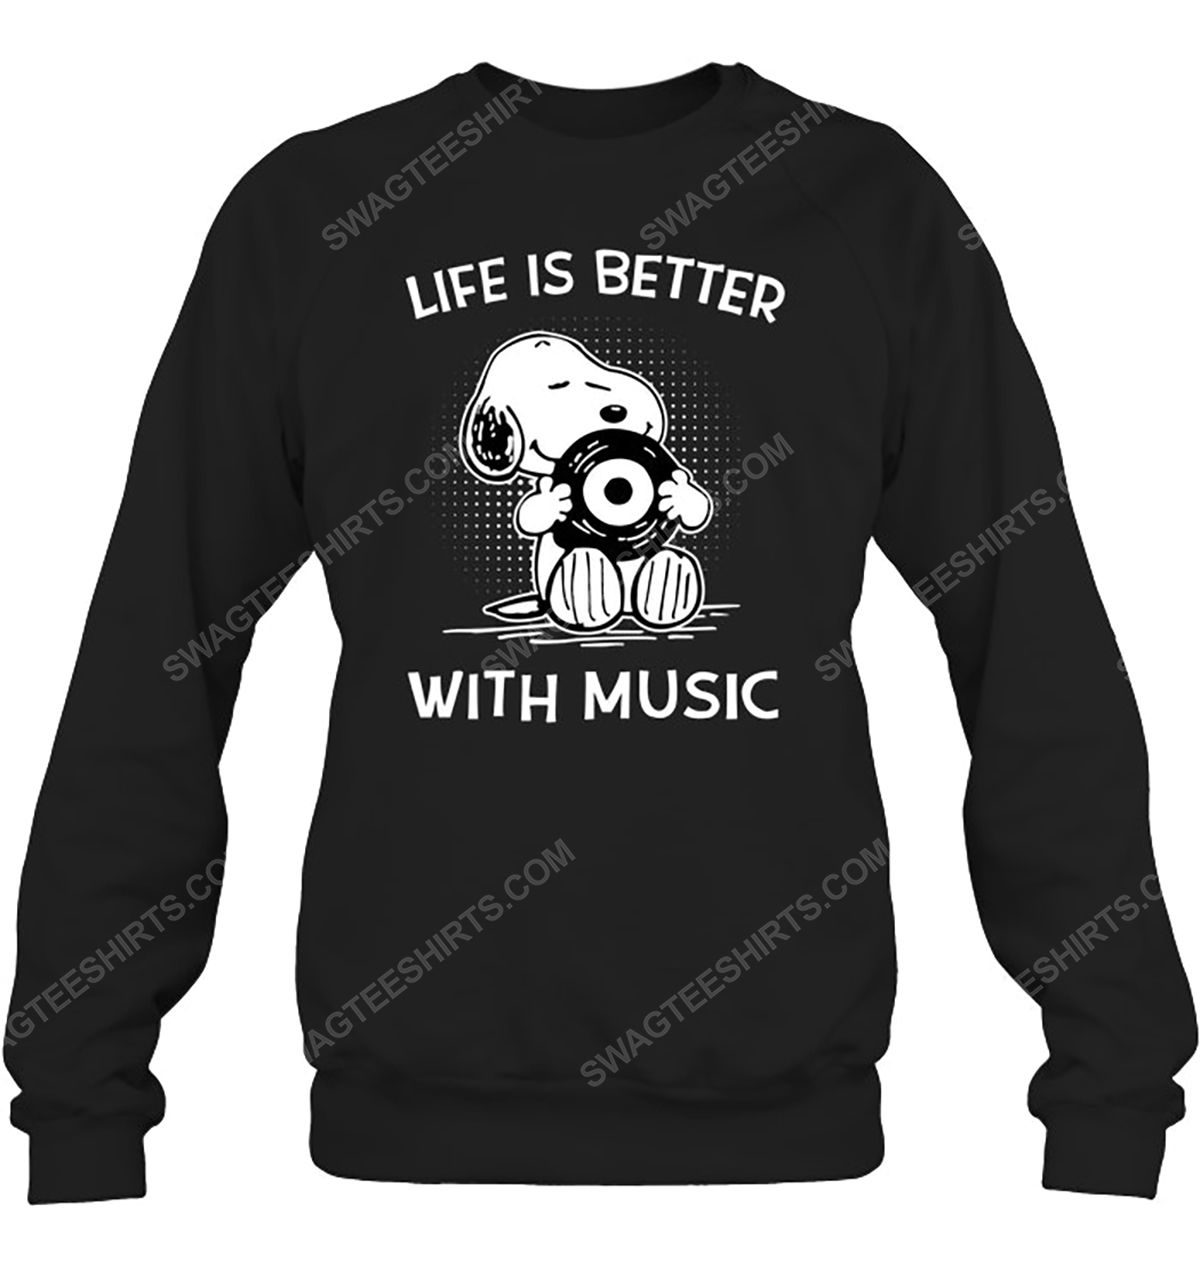 The peanuts snoopy life is better with music sweatshirt 1